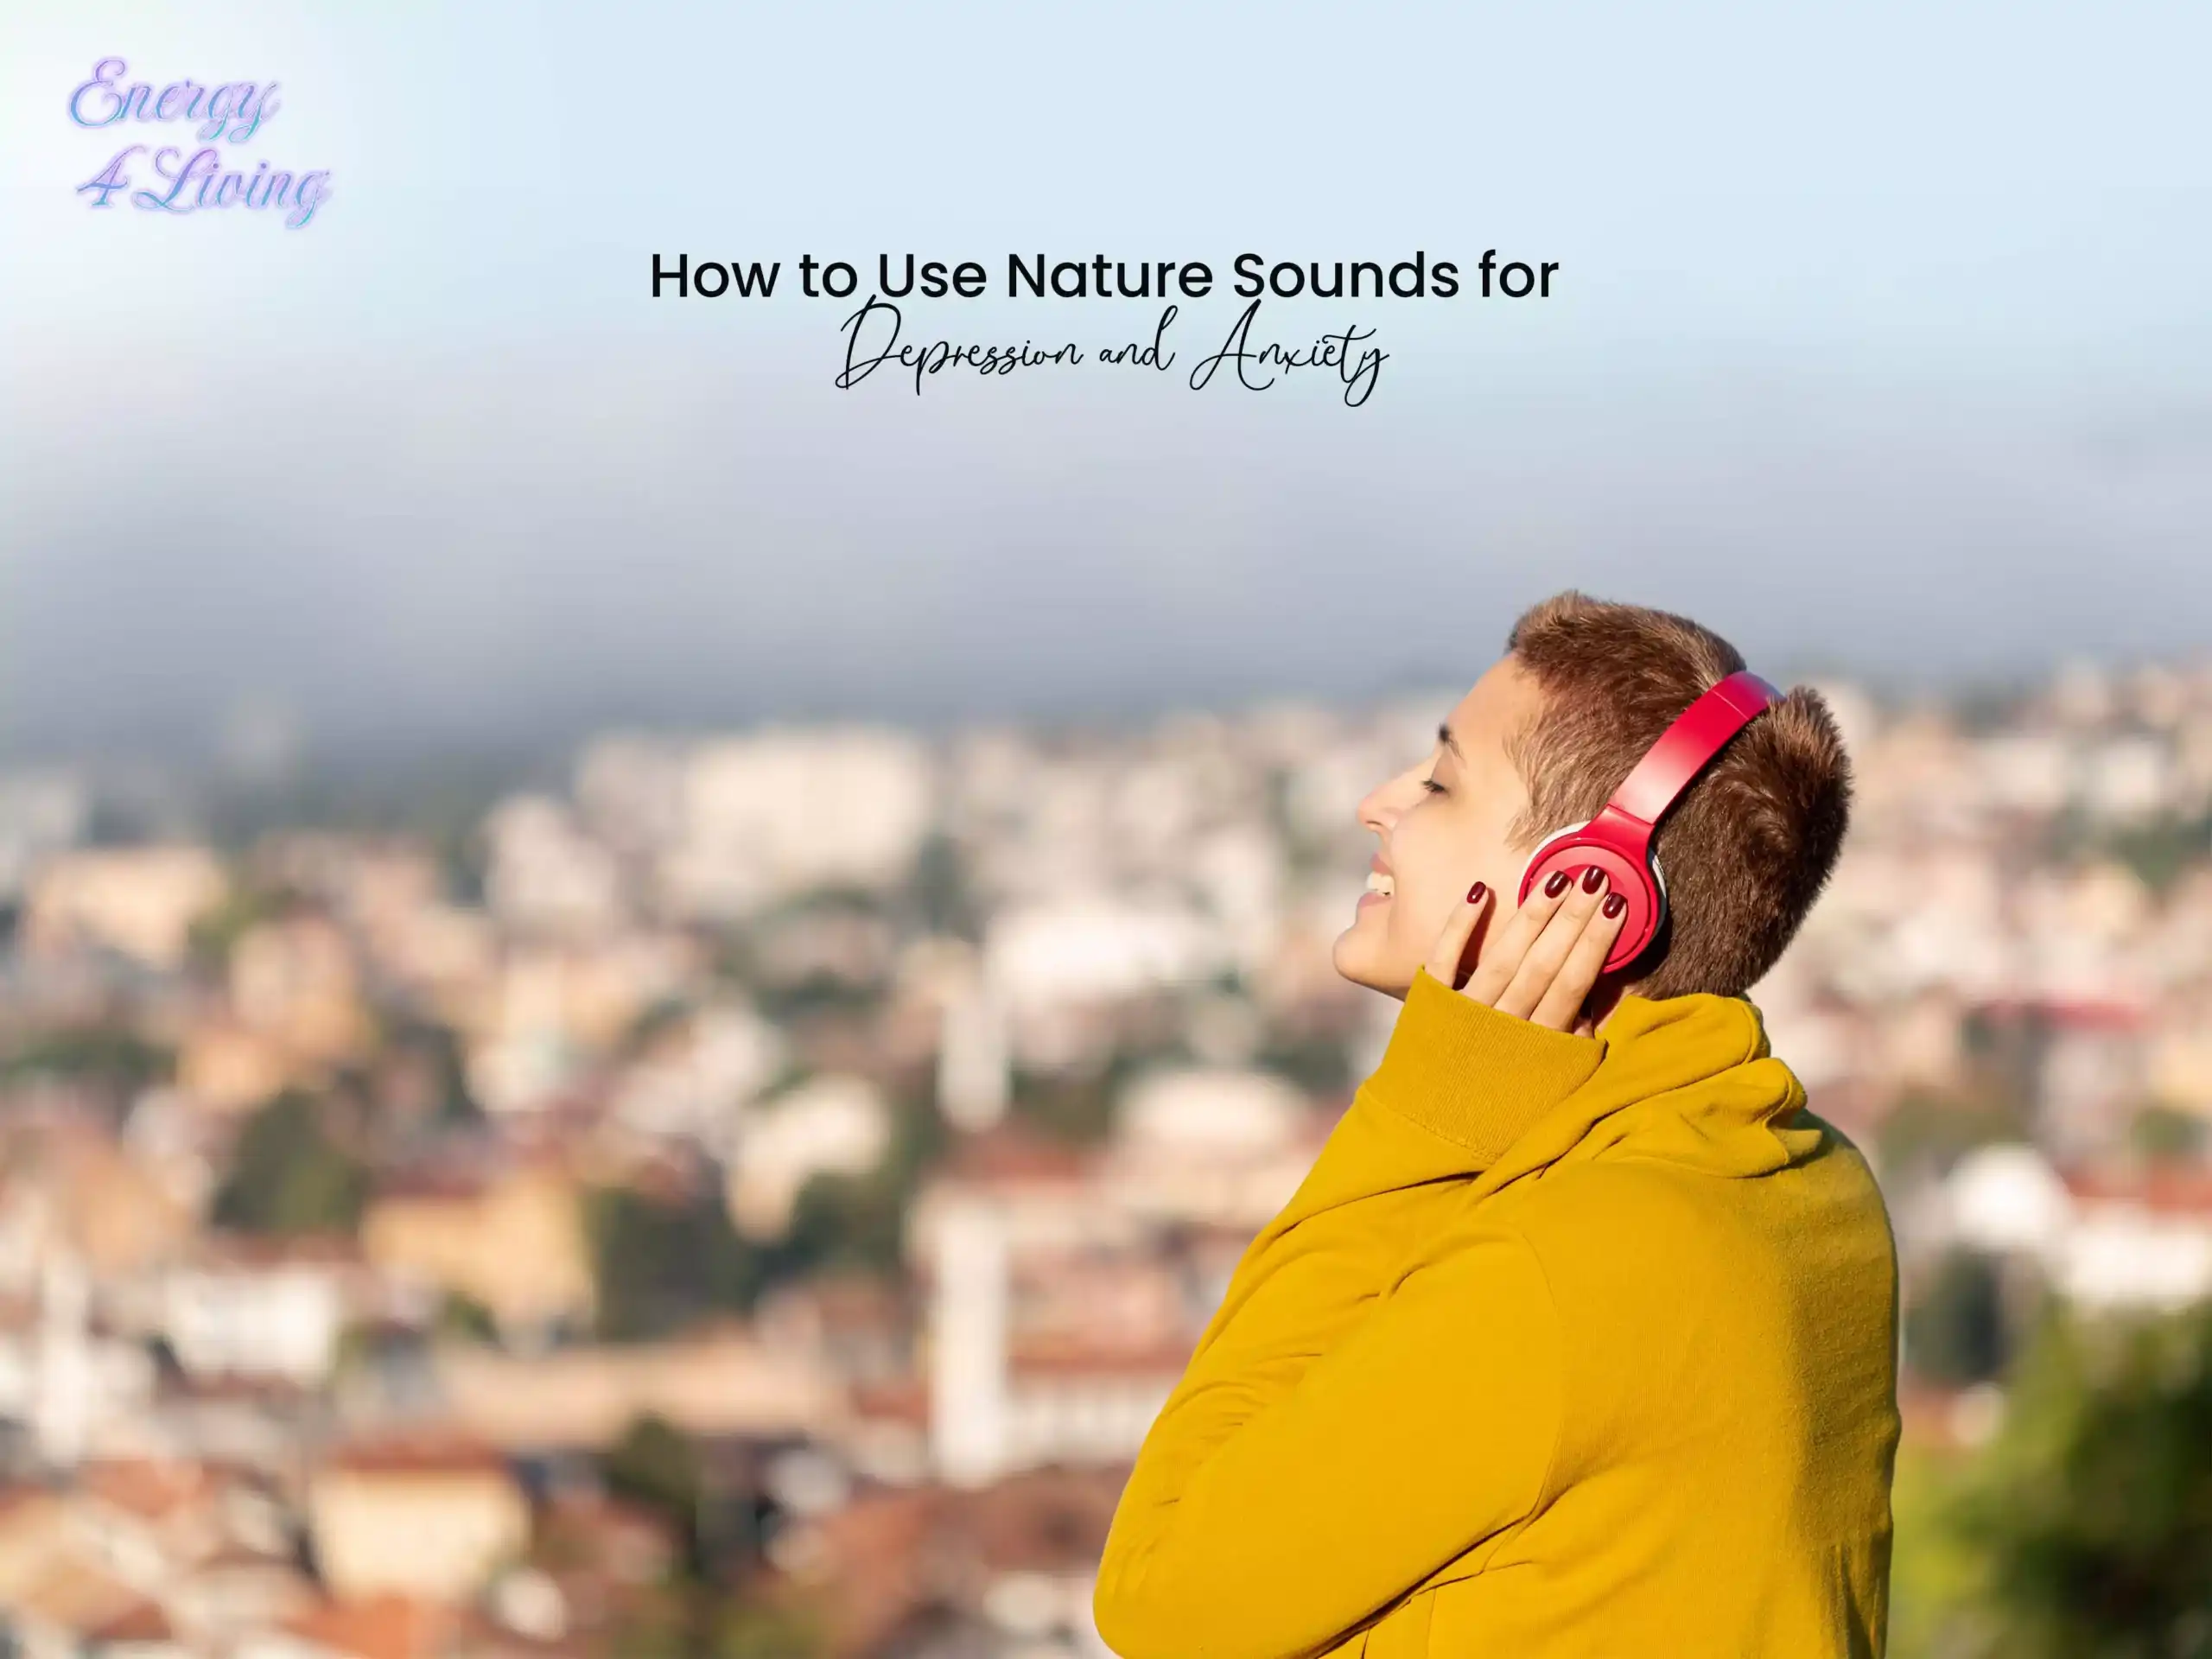 How to Use Nature Sounds for Depression and Anxiety